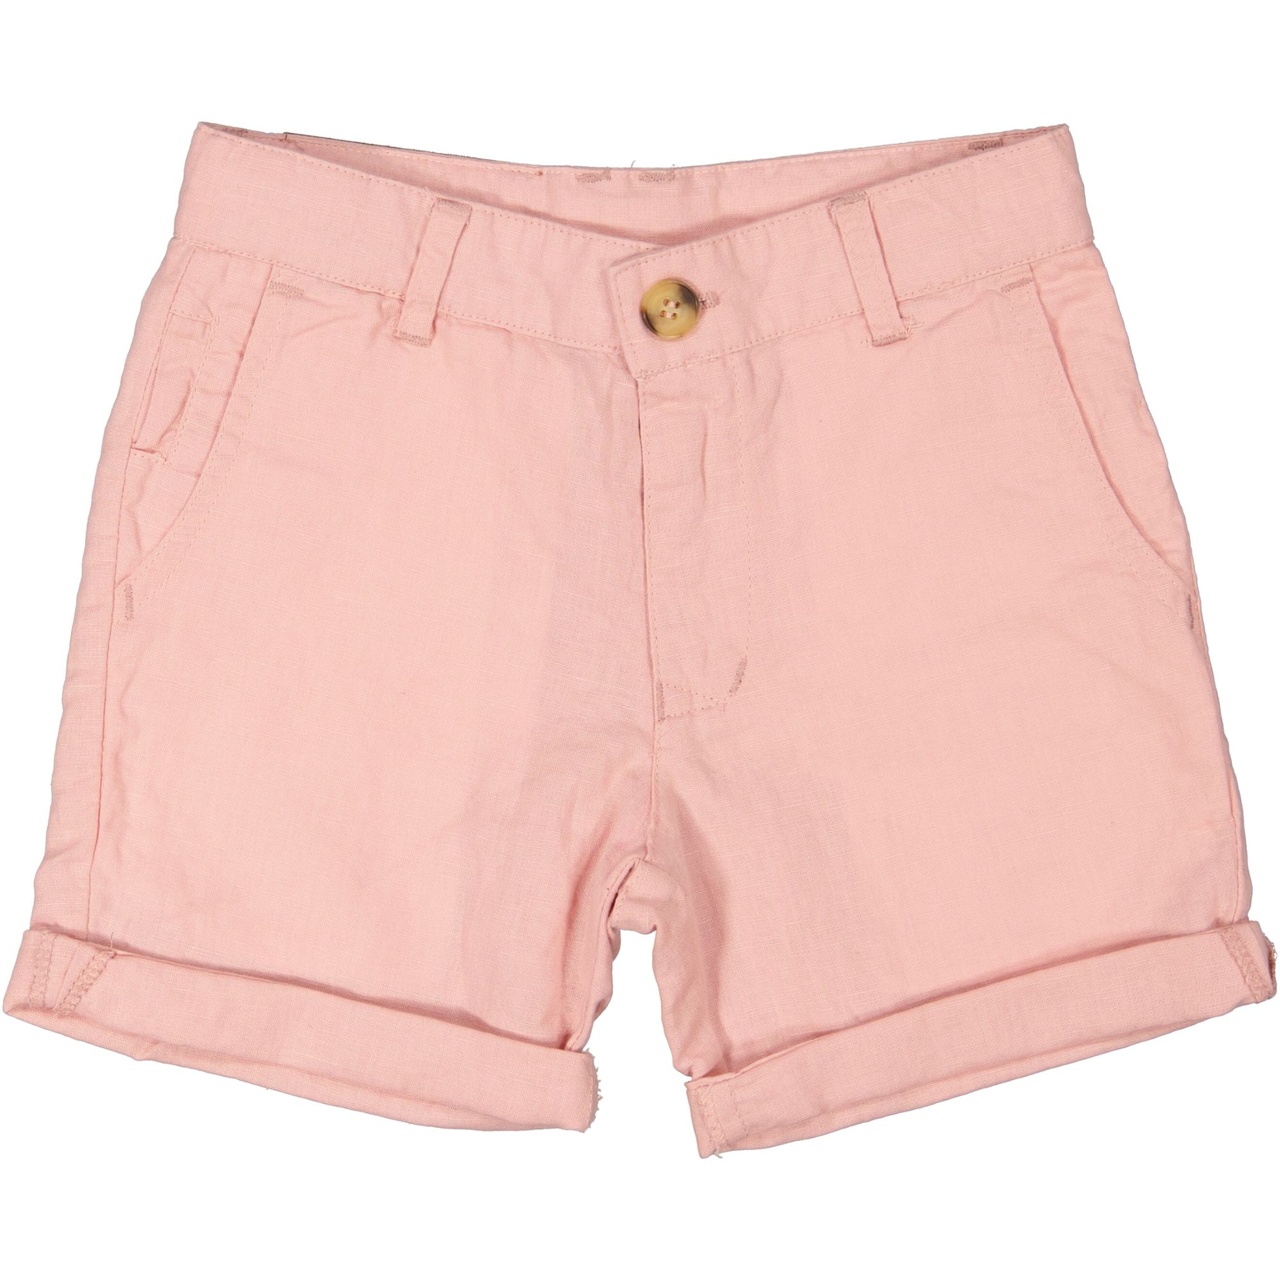 Linnen shorts Old pink 98/104